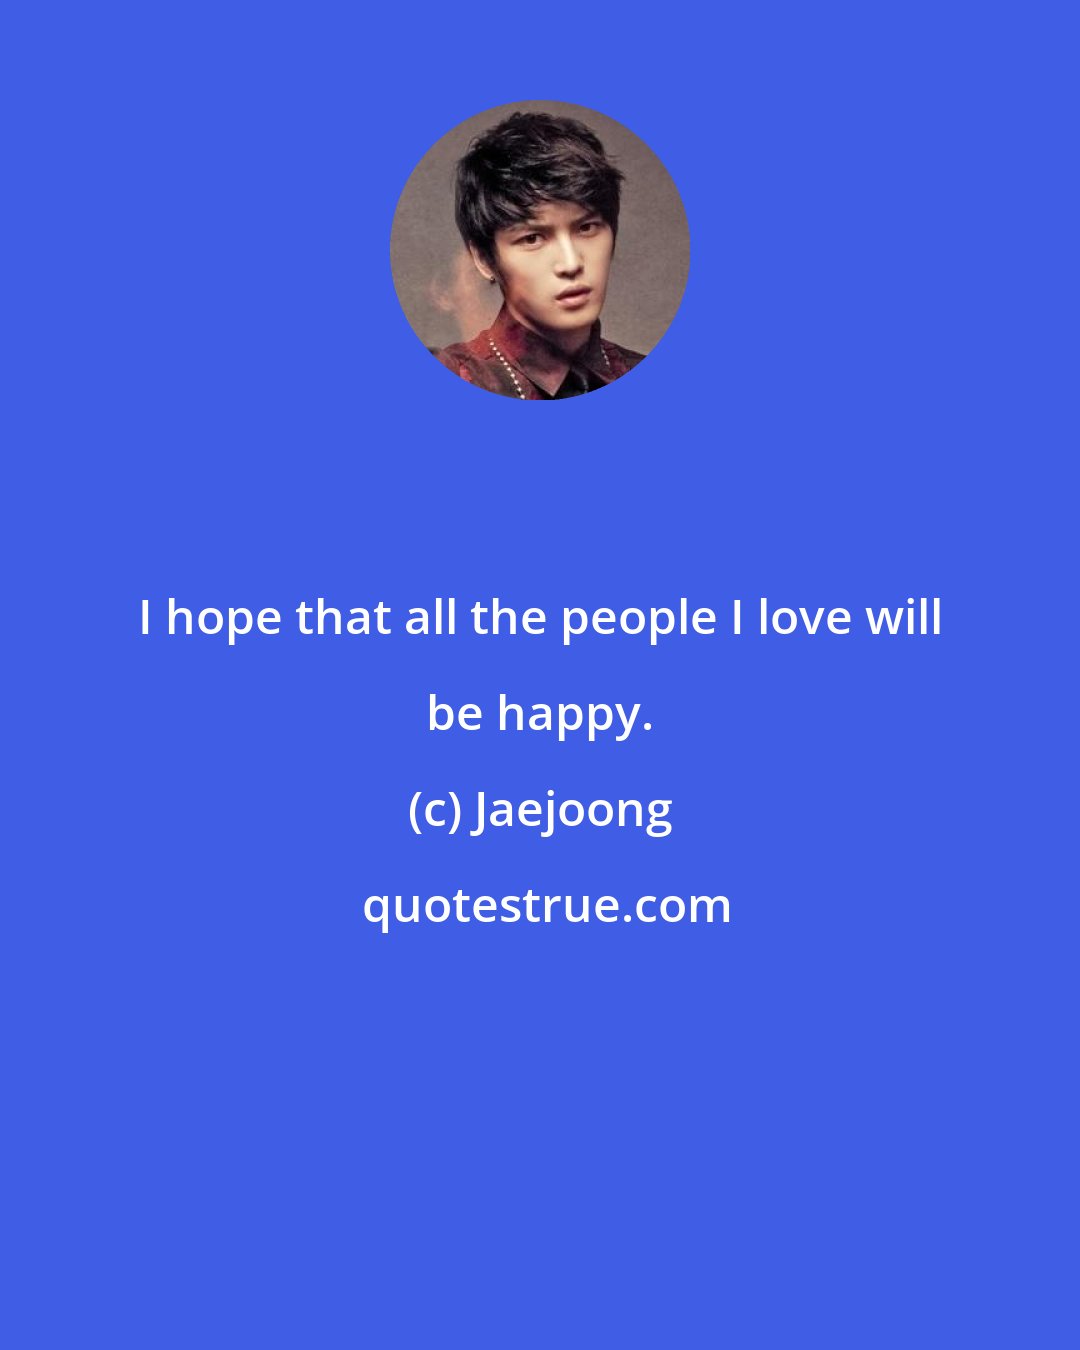 Jaejoong: I hope that all the people I love will be happy.